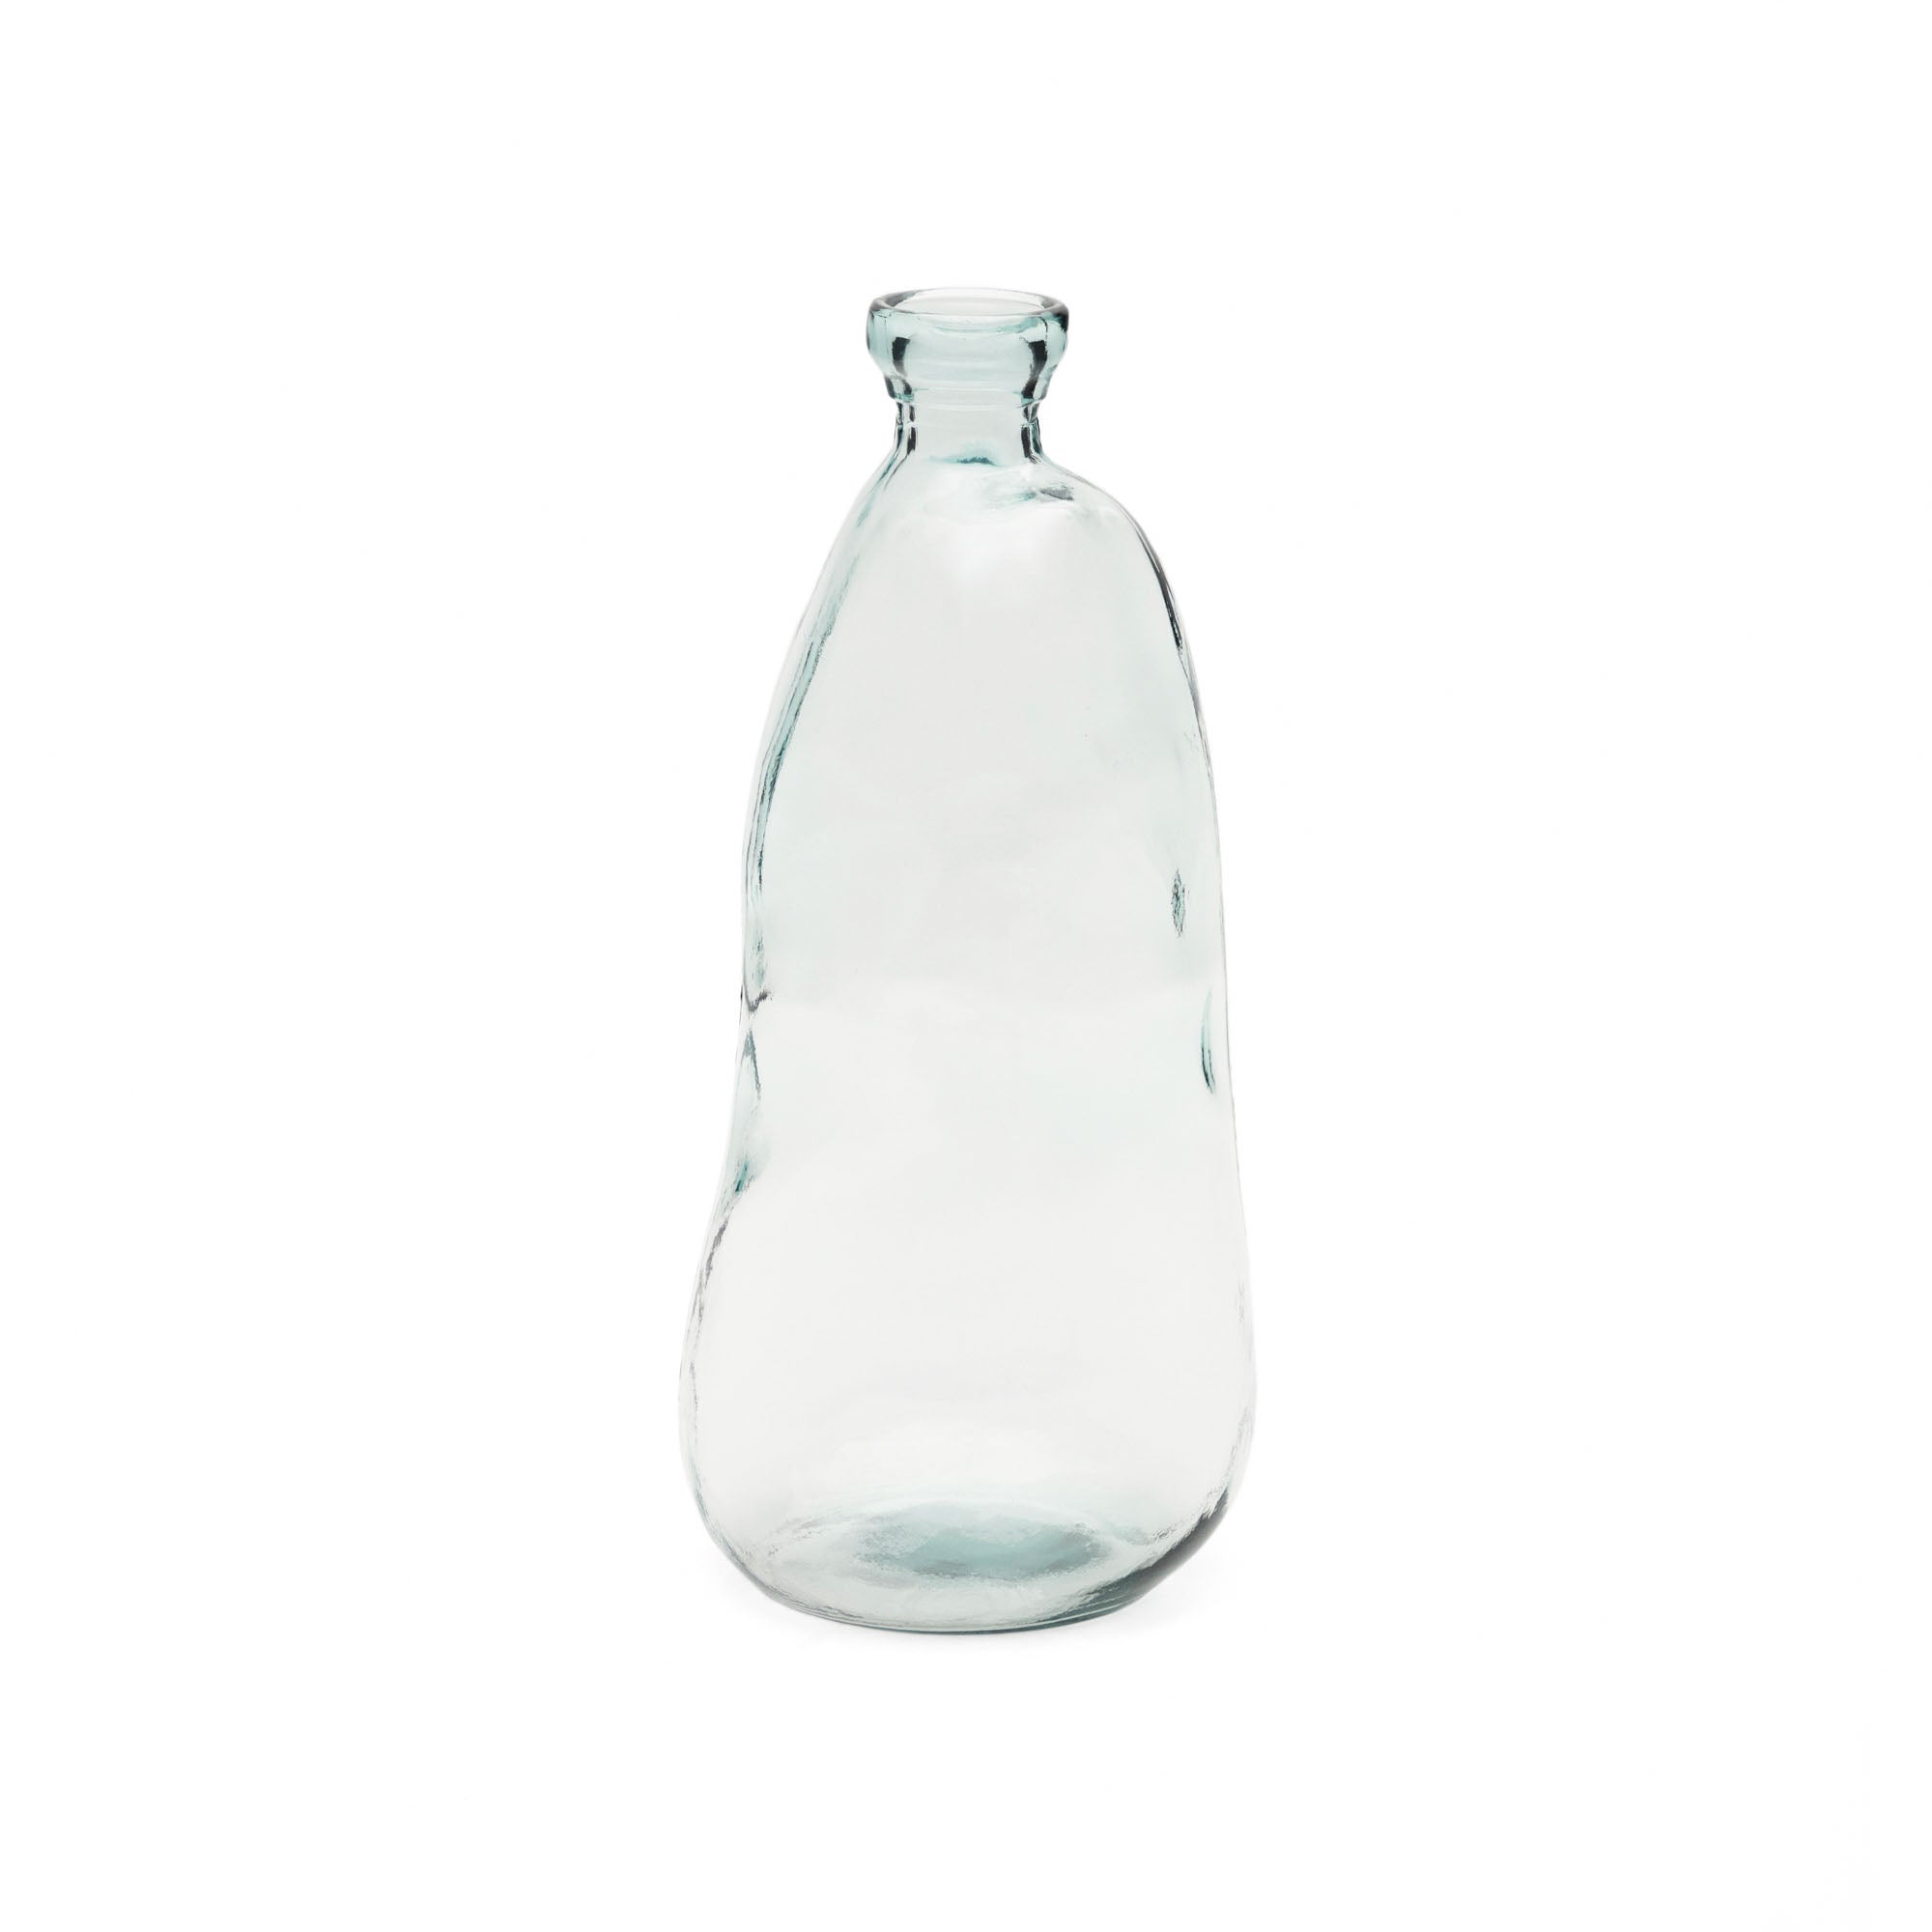 Brenna vase in 100% recycled transparent glass, 51 cm